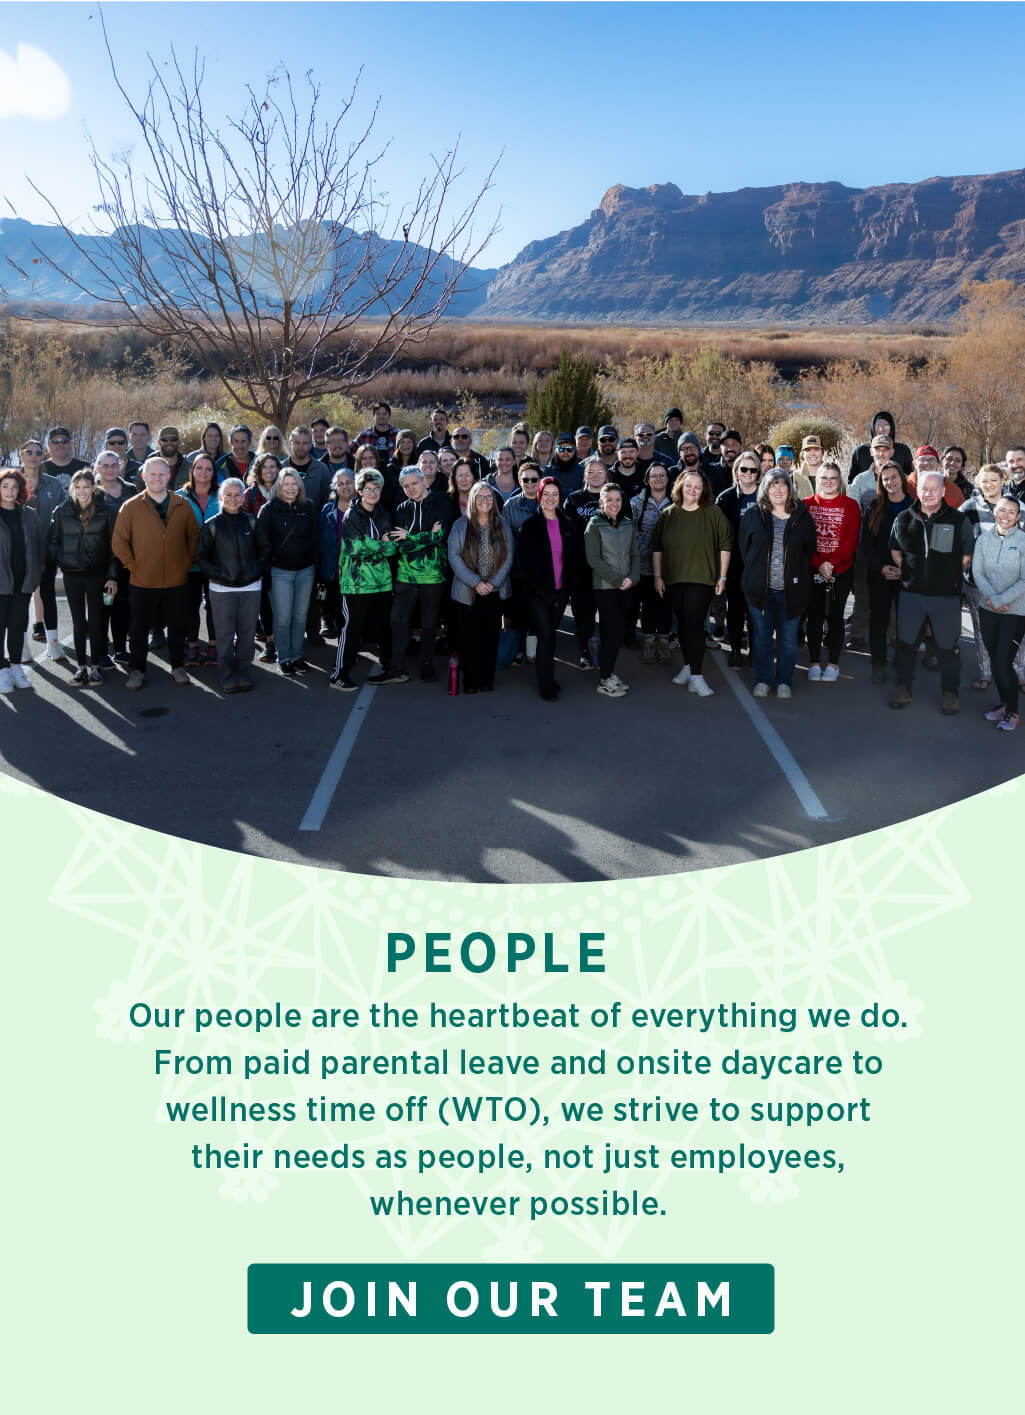 Our people are the heartbeat of everything we do. From paid parental leave and on-site daycare to wellness time off (WTO), we strive to support their needs as people, not just employees, whenever possible.